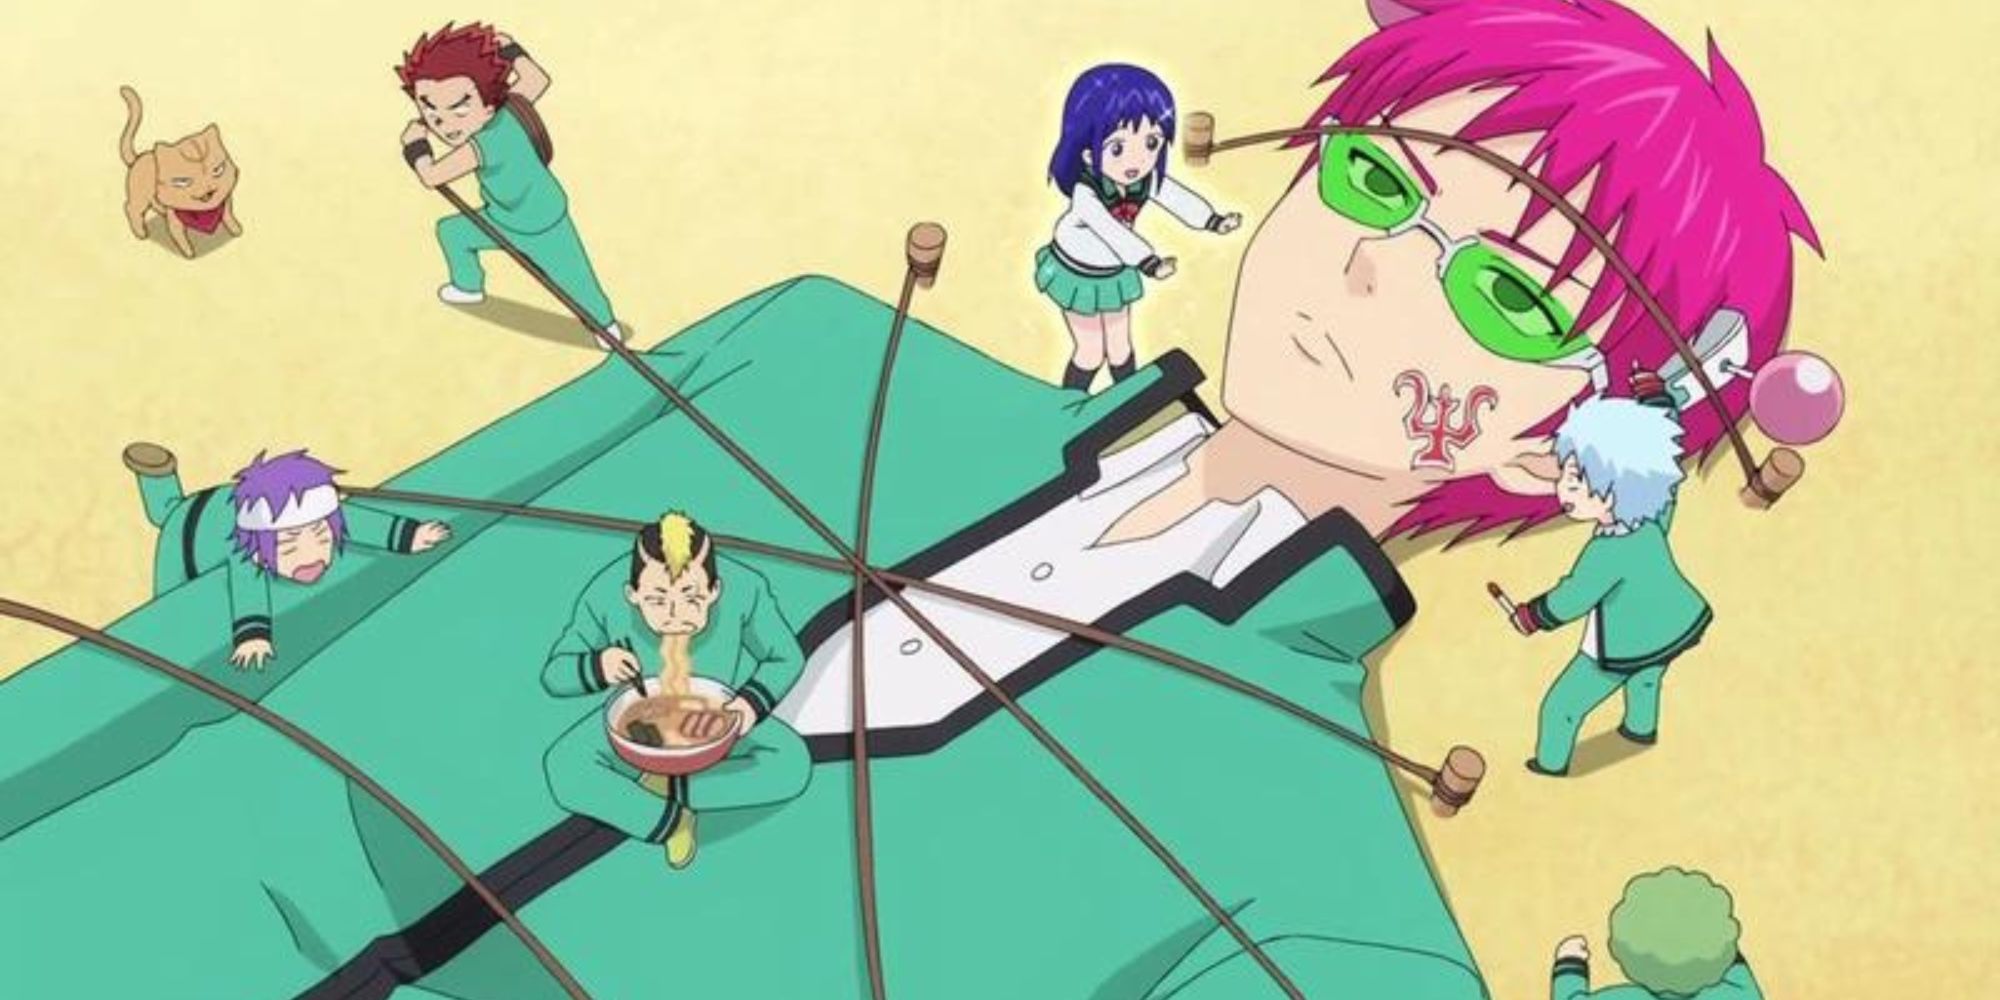 The Disastrous Life of Saiki K character tied down